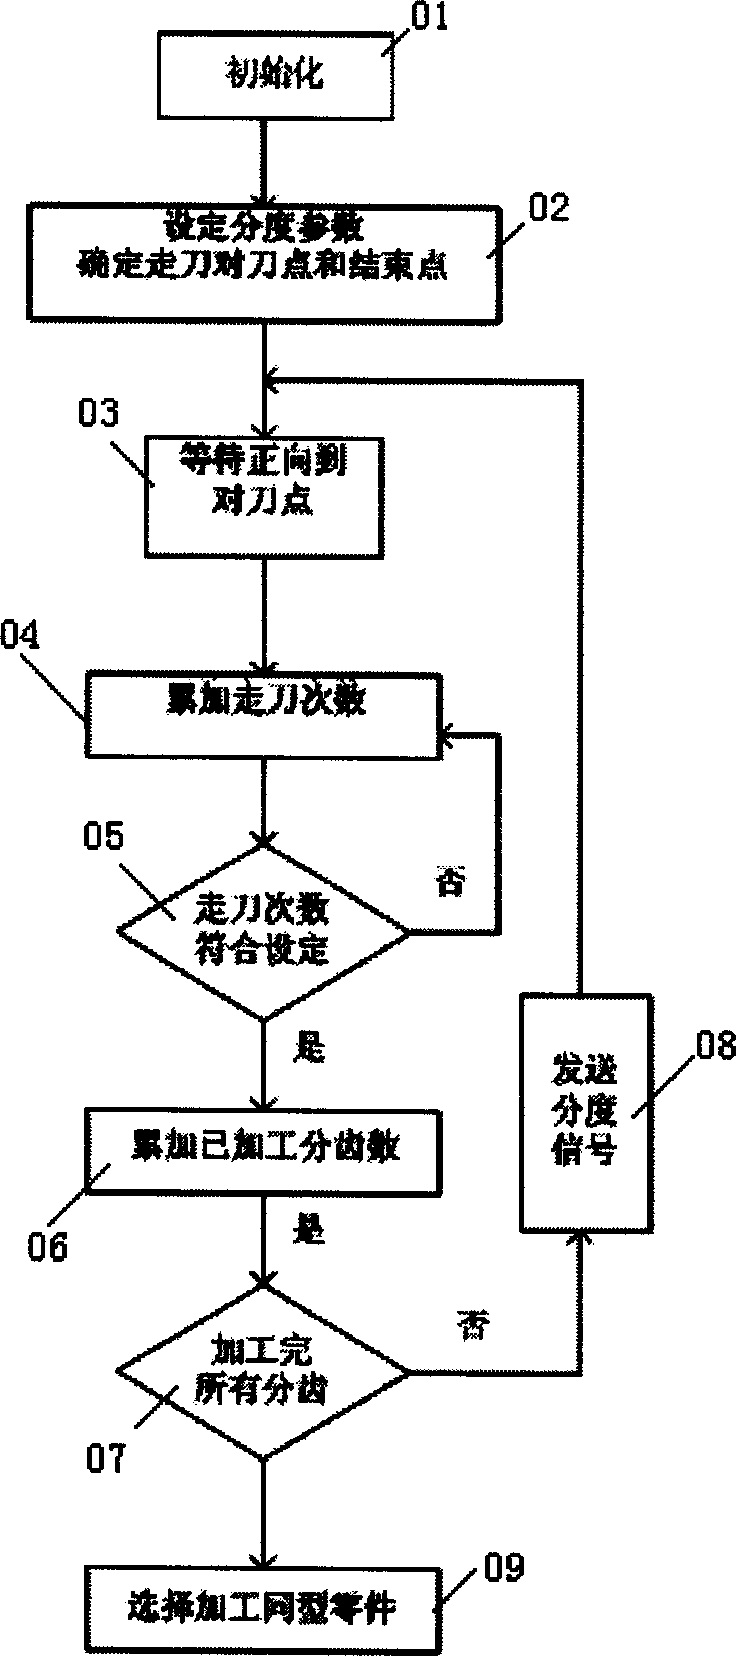 Machine tool real-time automatic indexing system and control method